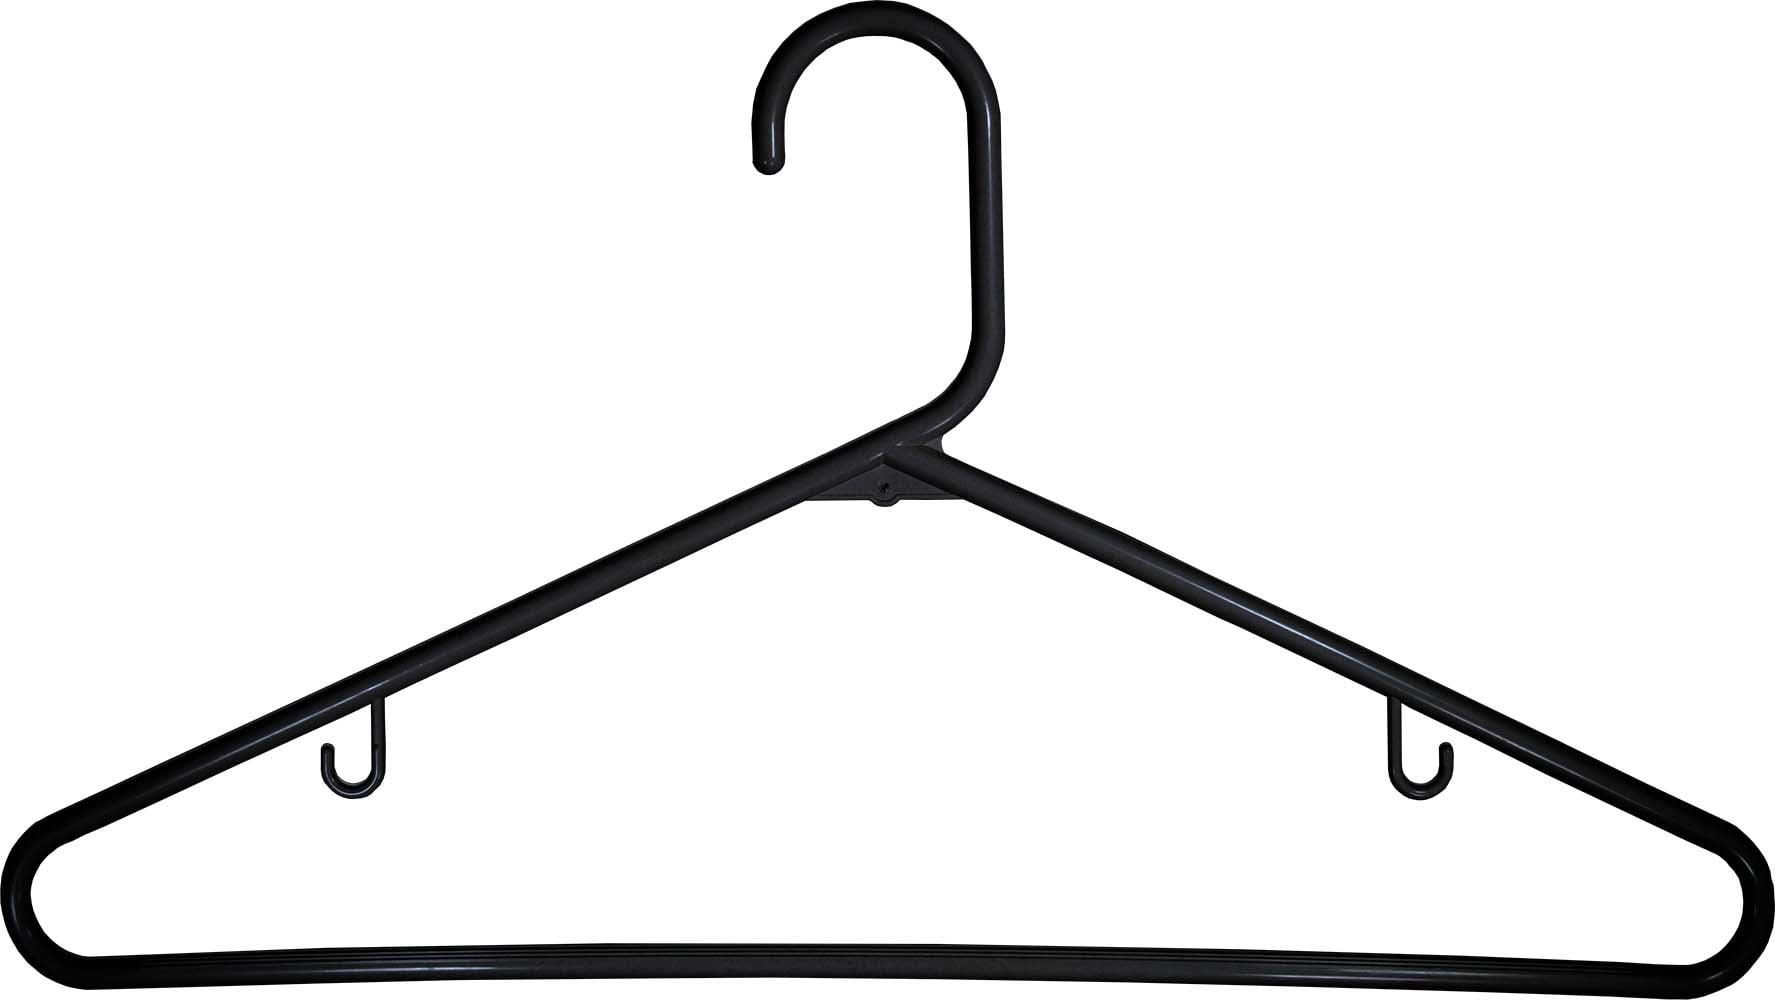 Plastic Hangers HD Heavy Duty, 16 Pcs. Elegant Black Color, Made in USA,  3/8” Thickness, Durable, Tubular, Lightweight, for Clothes, Coat, Pants